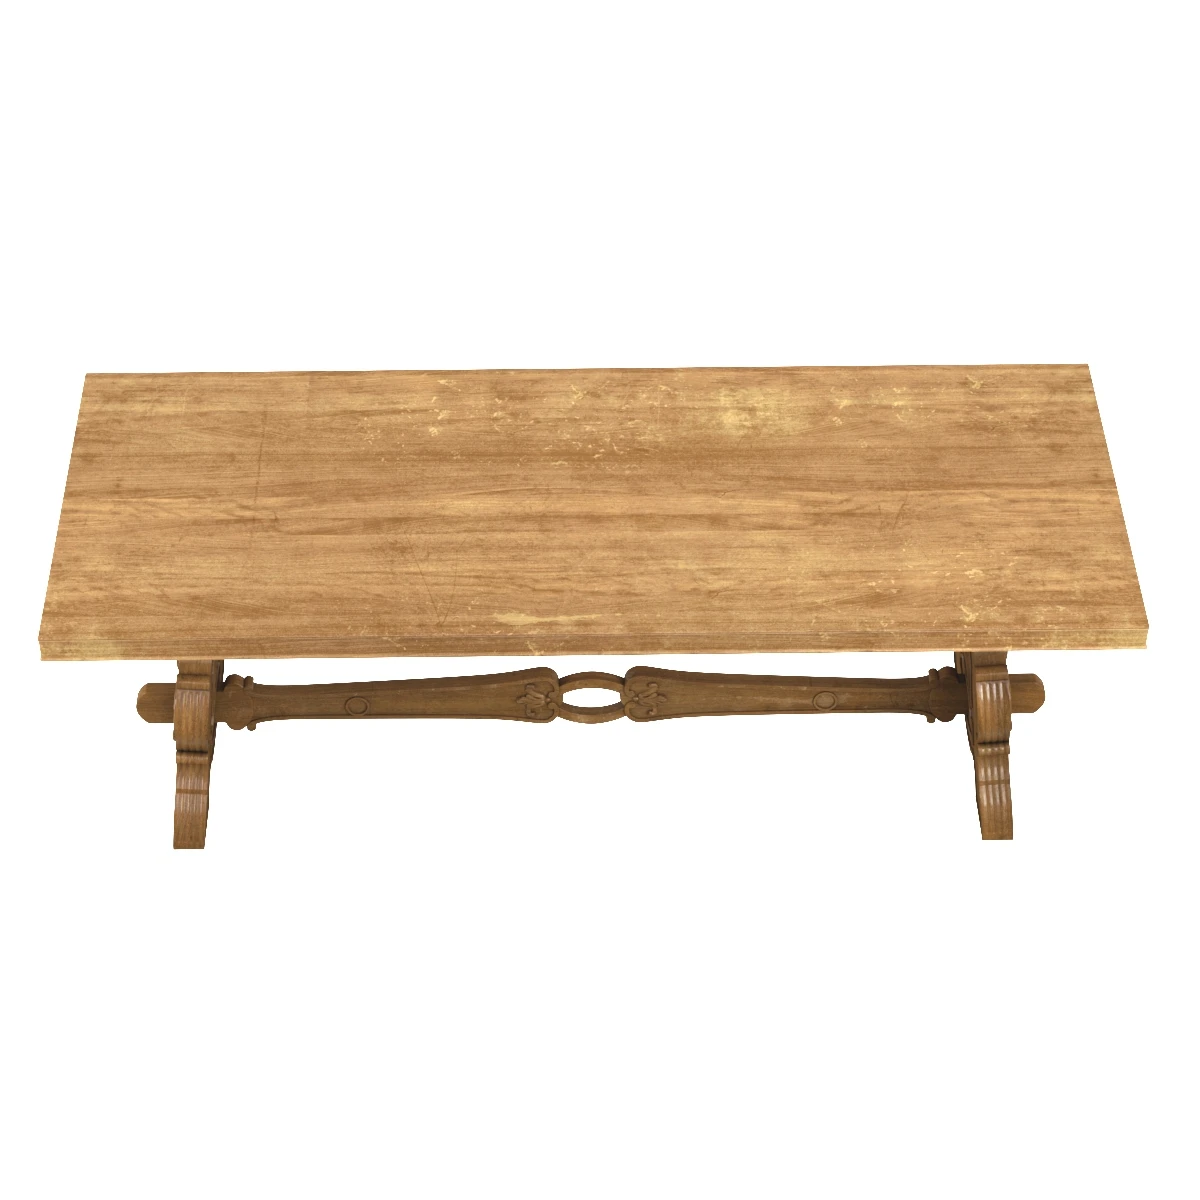 Early 20th Century French Carved Bleached Oak Marquetry Trestle Dining Table 3D Model_03